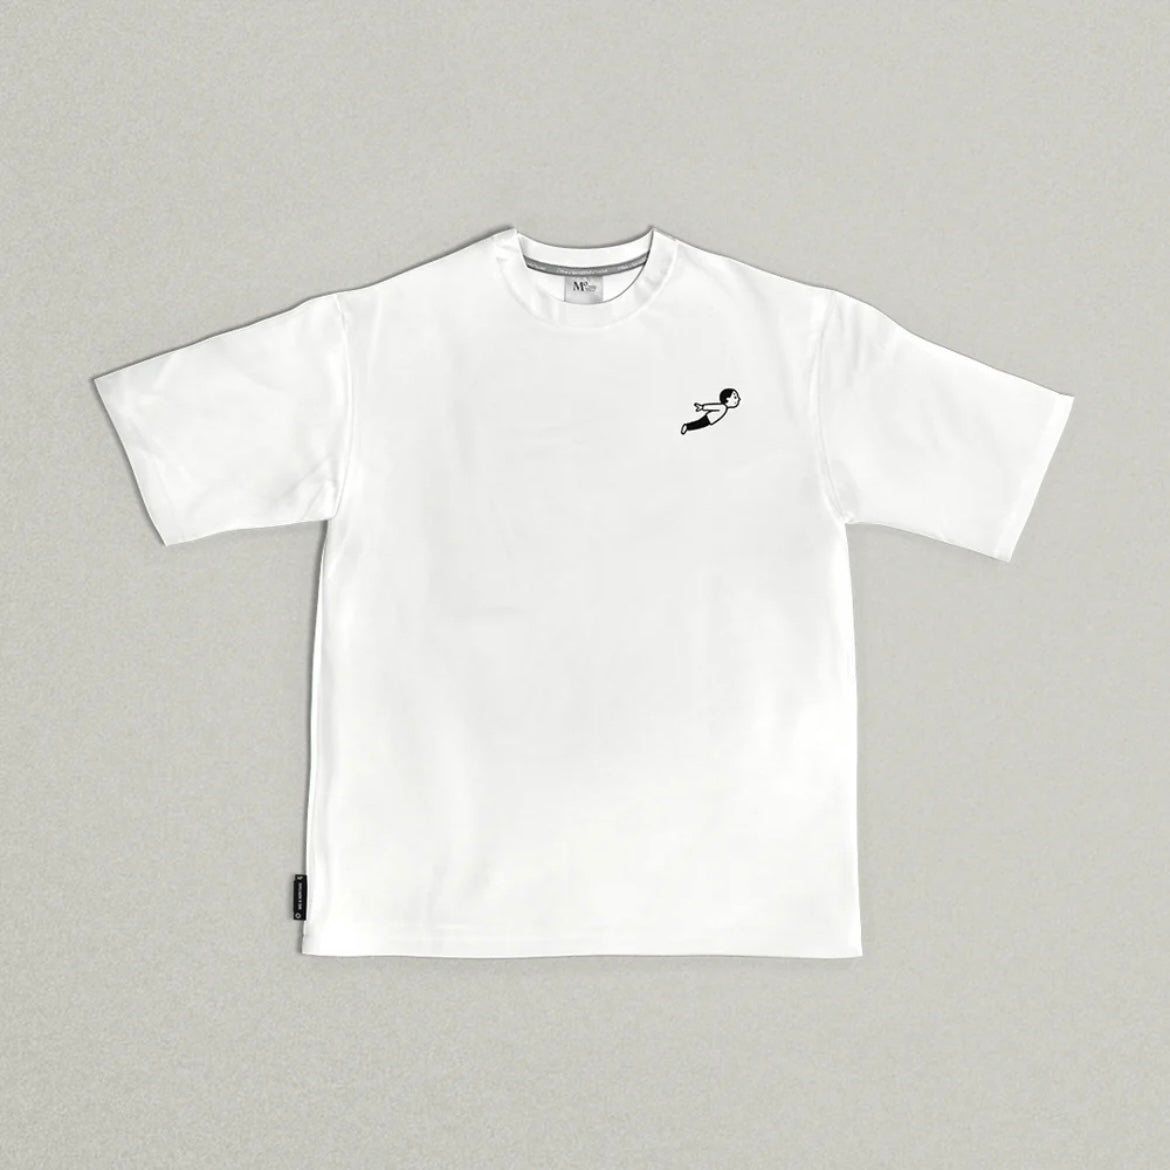 MO x Noritake "Ideas have wings" Adult Tee (White) - S/M/L